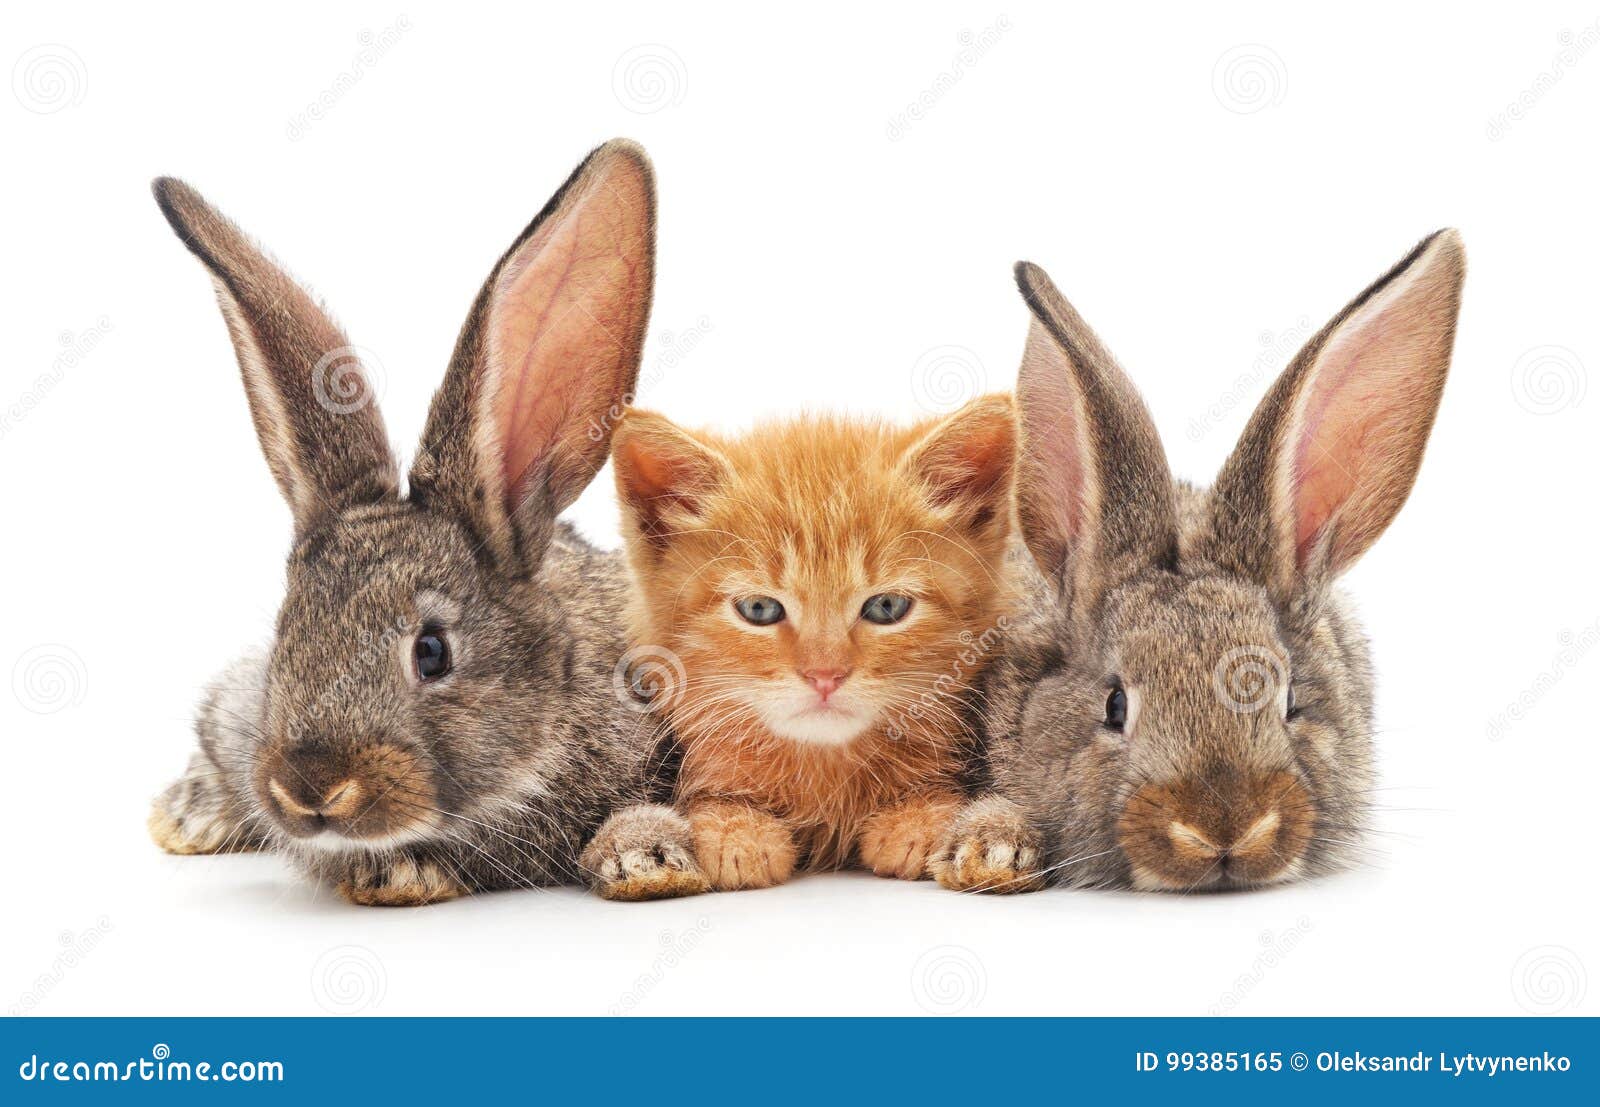 red kitten and bunnies.